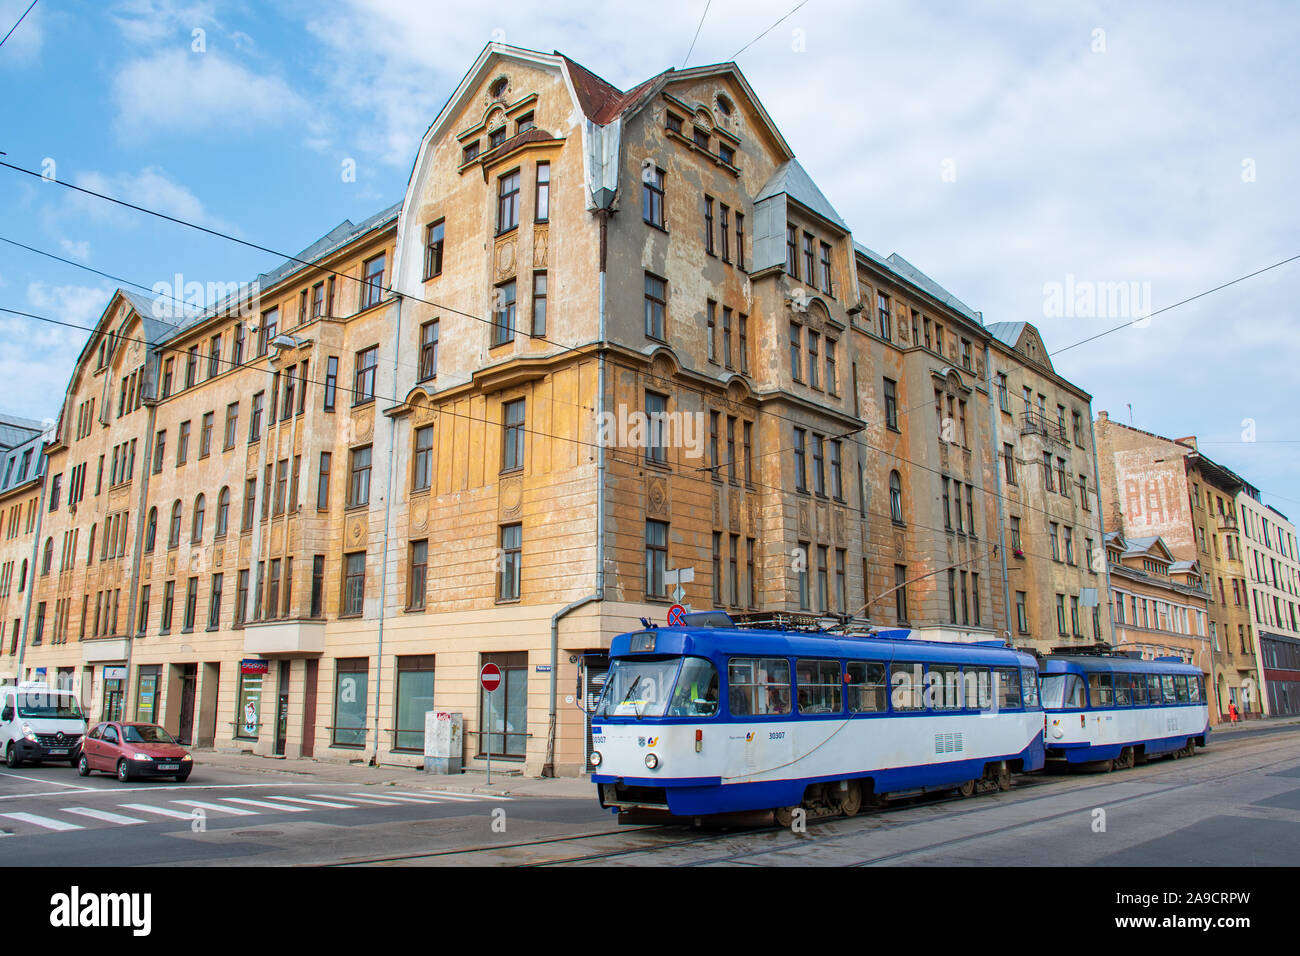 Soviet era in Riga, Latvia. Old buildings with Cyrillic writings, Soviet architecture with old trolley bus in Riga Stock Photo